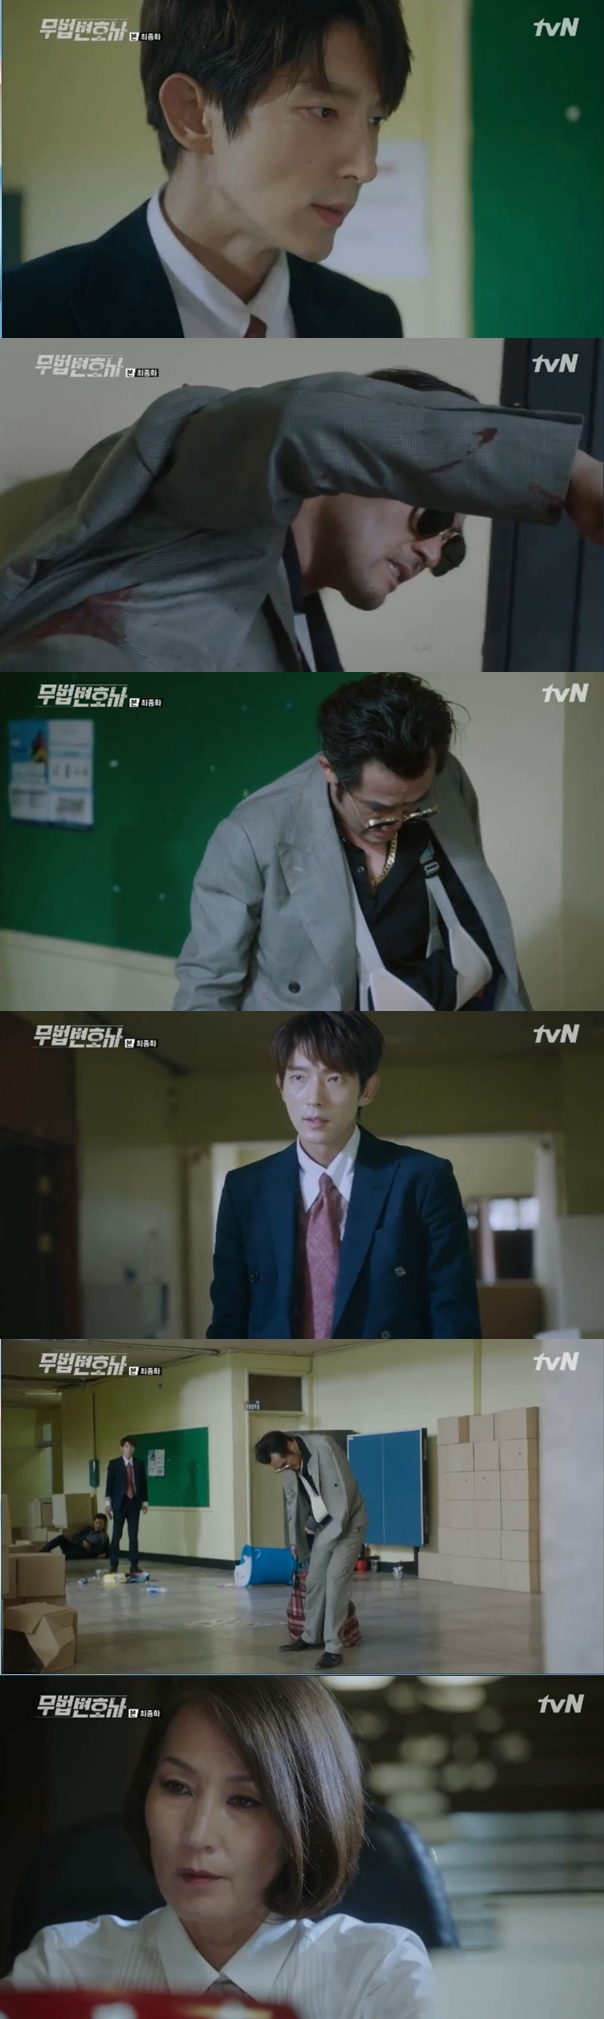 If he could not handle Choi Min-soo, Lee Hye-Yeong became urgent.On TVN Lawless Lawyer, which was broadcasted at 9:10 pm on the 1st, there was a picture of Bong Sang-pil (Lee Joon-gi) who was betrayed by Cha Moon-sook.Ano told Bong Sang-pil, I can not go to the trial. When I started to smuggle, I was stabbed by Kim.Kim stabbed An-o-ju and then stabbed him to death in the interfering Seokgwan-dong, when Bong Sang-pil arrived to restrain Kim, and saved An-o-ju from the crisis of death.Ano asked Bong Sang-pil, Did Cha Moon-sook do it? And when Bong Sang-pil said that he did, he asked, What happened to the trial? Bong Sang-pil said, Trial was stopped.Anoju heard this and left the word I still have a chance to stand on the trial.Cha Moon-sook was rushed to hear Kims statement that he had not been able to remove An-o-ju, and she could not hide her nervous eyes after she told Kim to find it quickly.6